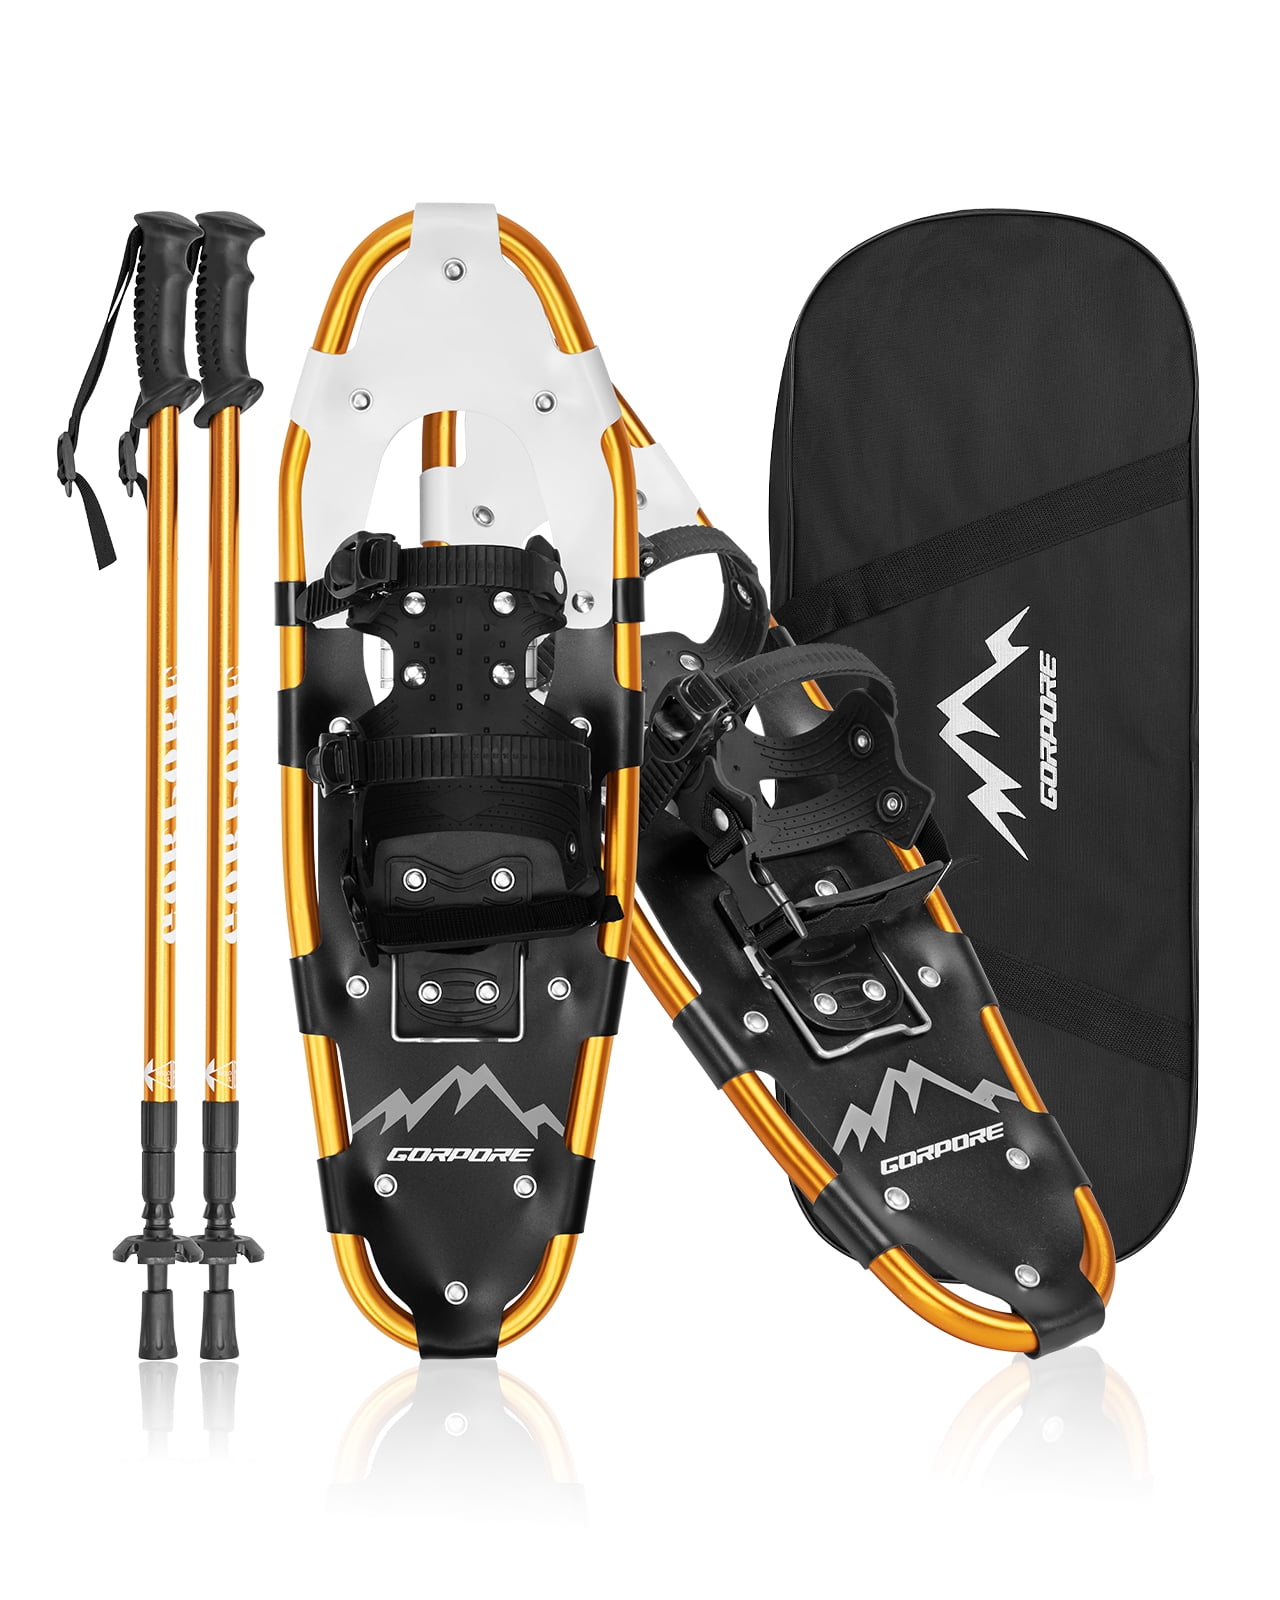 FLASHTEK 21/25/30 Inches Light Weight Snowshoes for Women Men Youth Kids Aluminum Terrain Snow Shoes with Trekking Poles and Carrying Tote Bag 